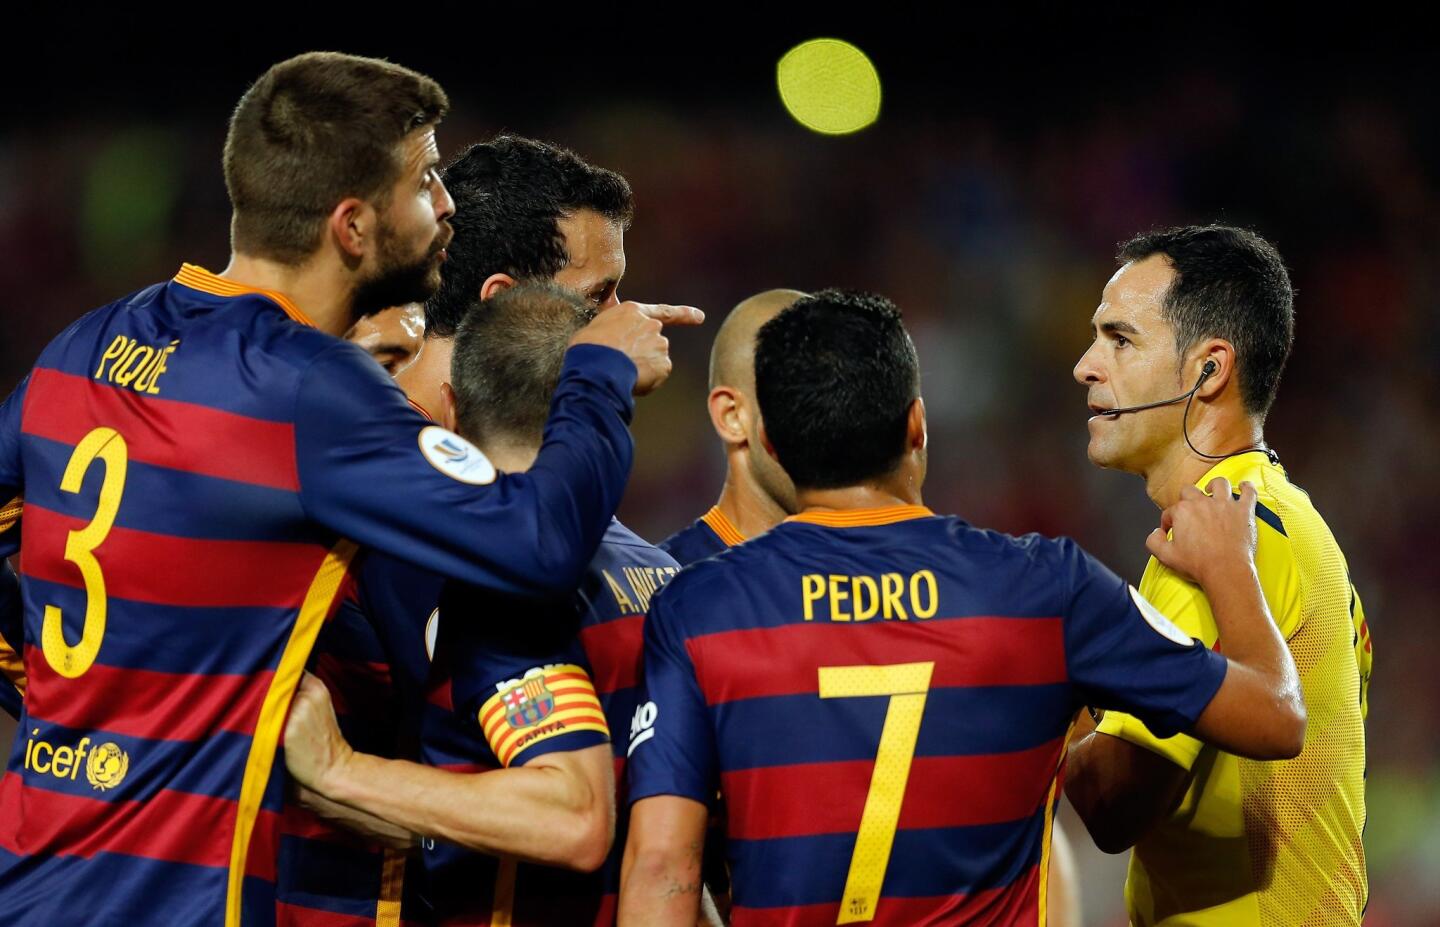 Barcelona's Gerard Pique, left, gestures to Referee Velasco Carballo, right, and his shown a red card during a second leg Spanish Super Cup soccer match between FC Barcelona and Athletic Bilbao at the Camp Nou stadium in Barcelona, Spain, Monday, Aug.17, 2015. (AP Photo/Manu Fernandez)